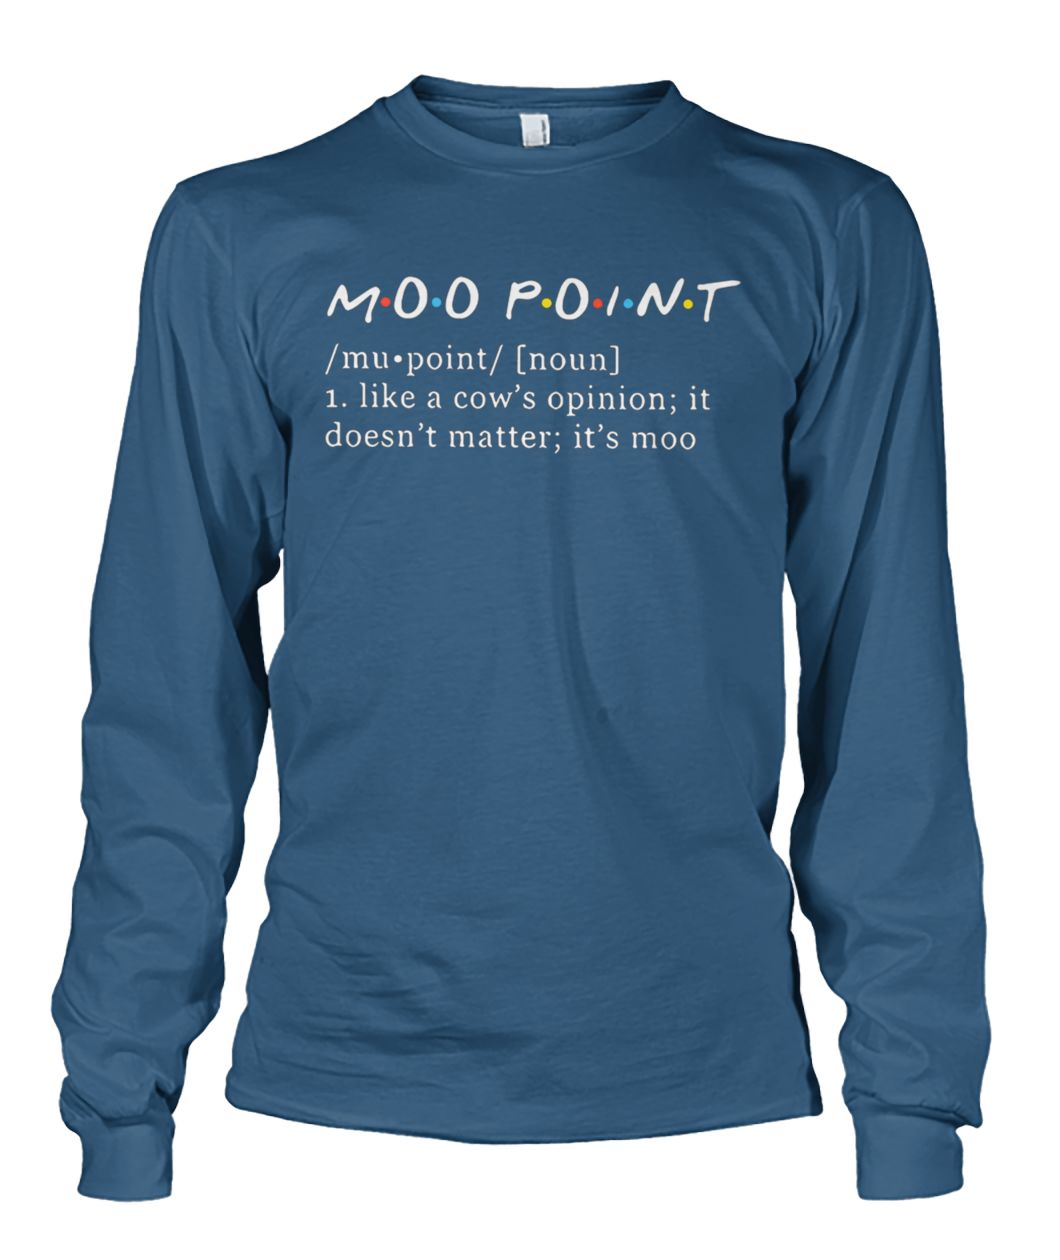 Moo point definition meaning like a cow’s opinion it doesn’t matter it’s moo unisex long sleeve